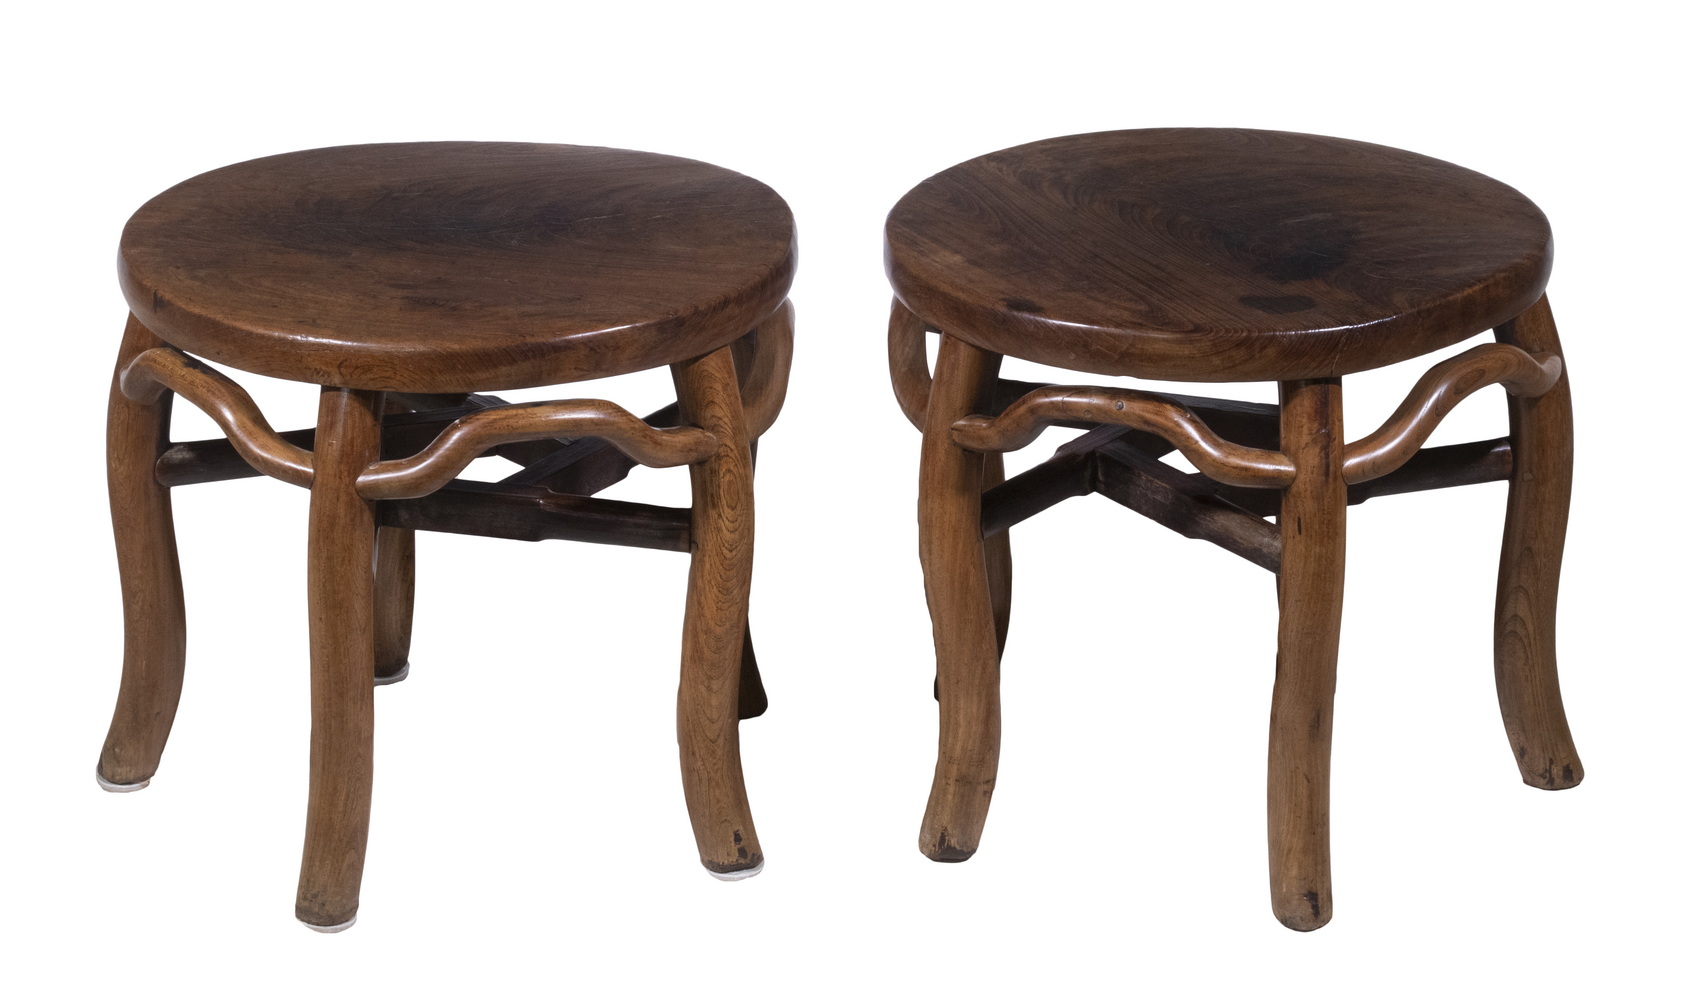 PR OF ROUND HUANGHUALI WOOD TABLES Round